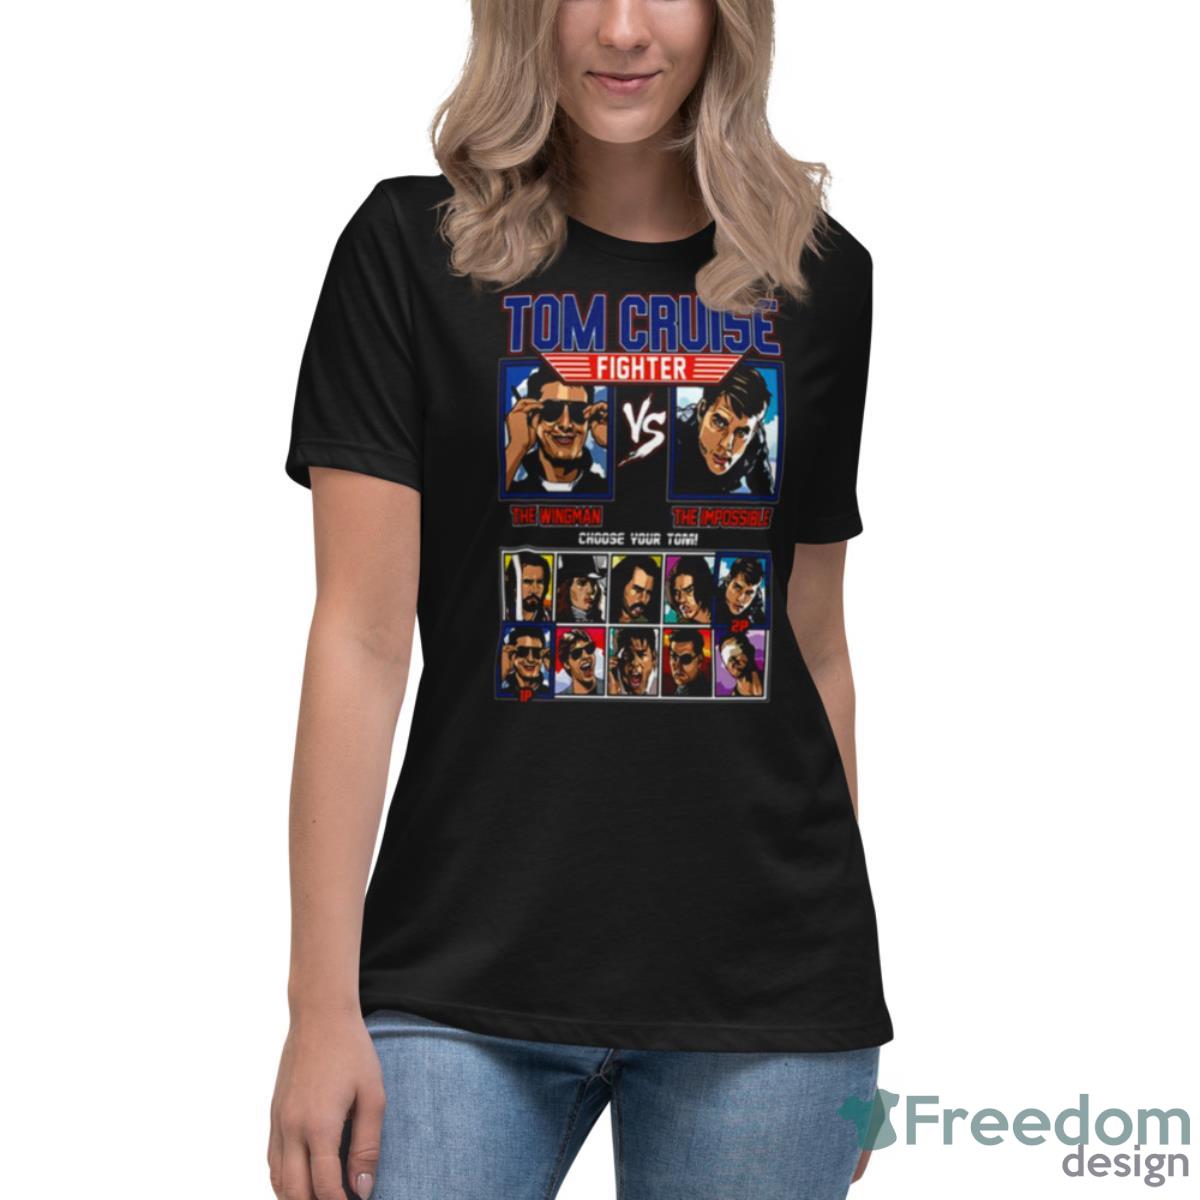 Tom Cruise Fighter Topgun Vs Mission Impossible shirt